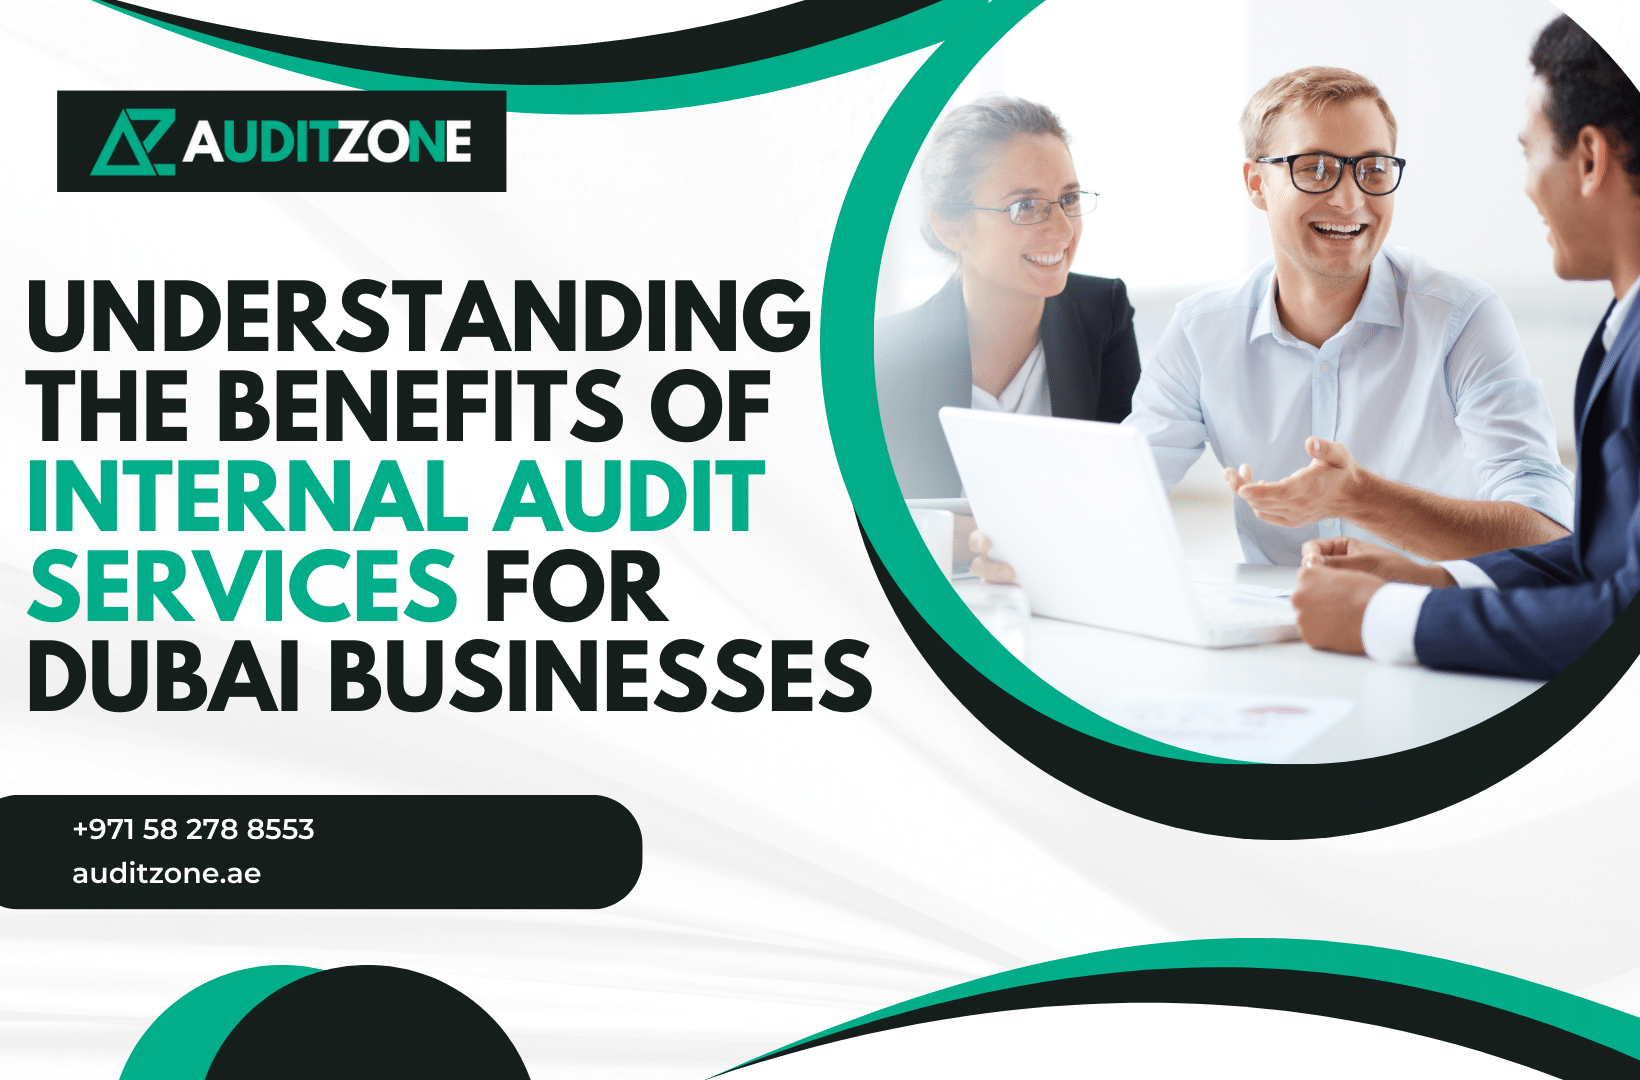 Understanding the Benefits of Internal Audit Services for Dubai Businesses